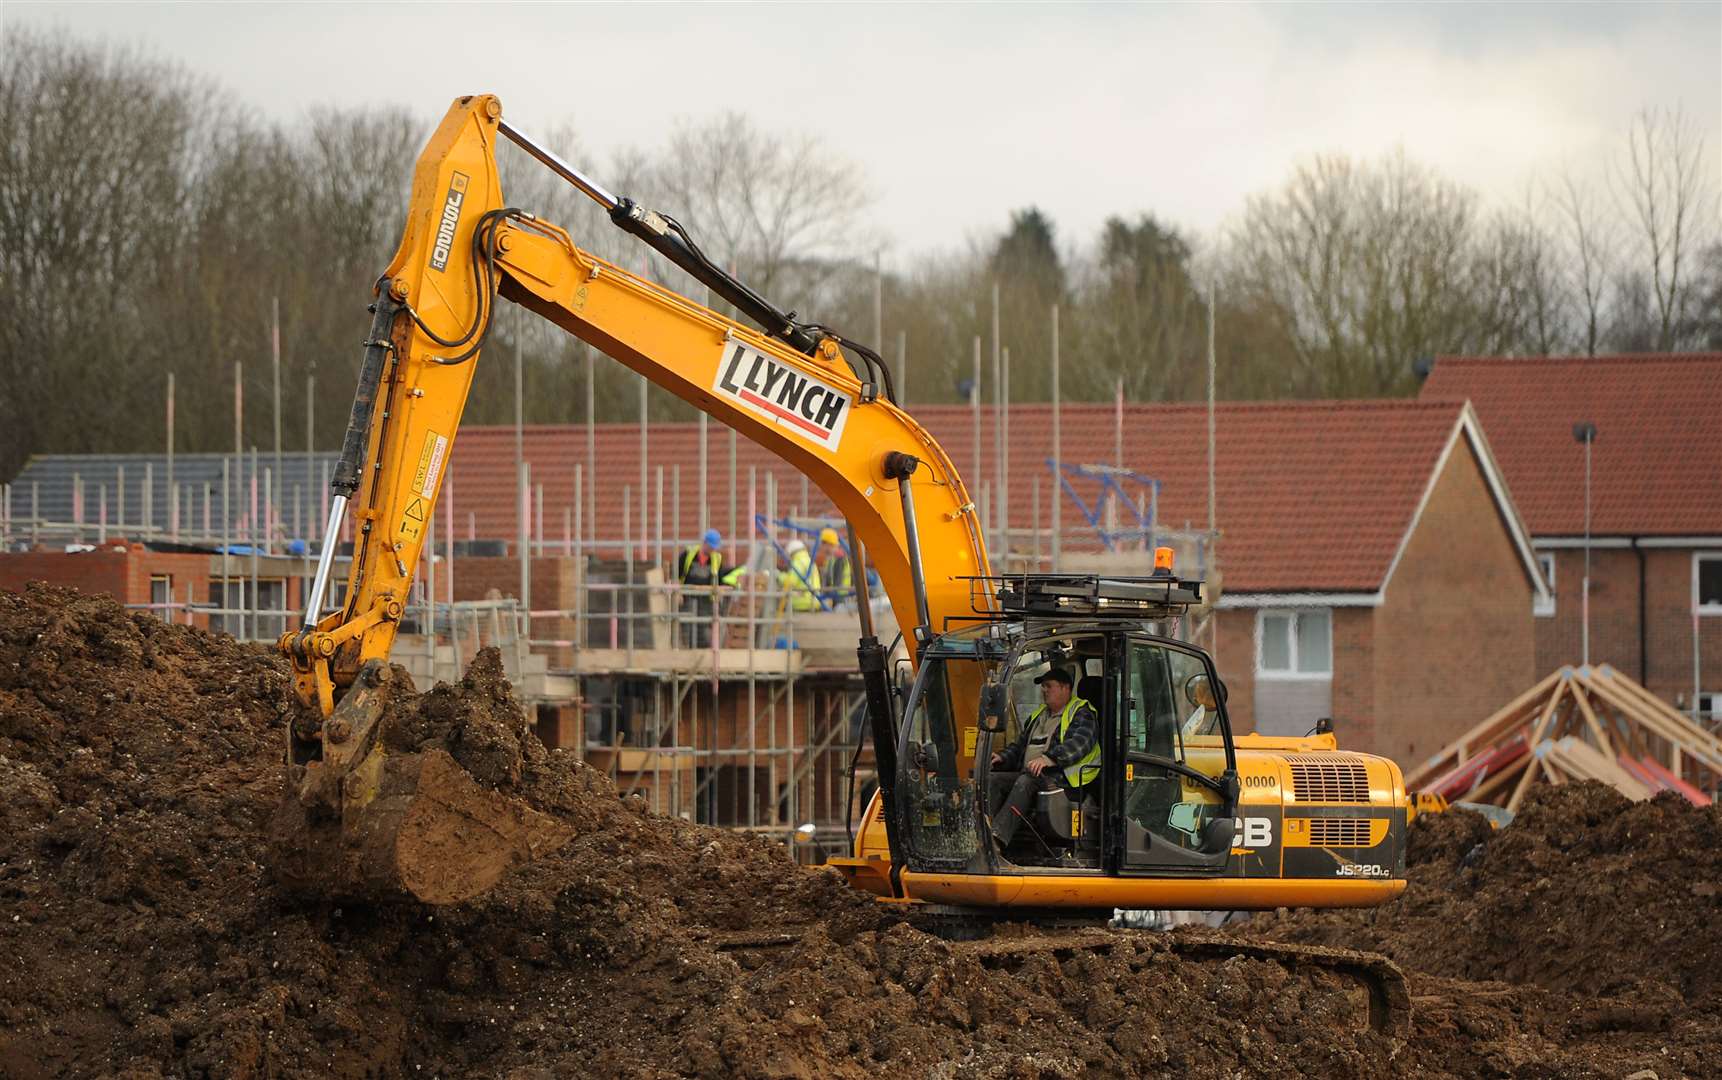 New homes will be constructed in Kings Hill - two third of which will be affordable housing